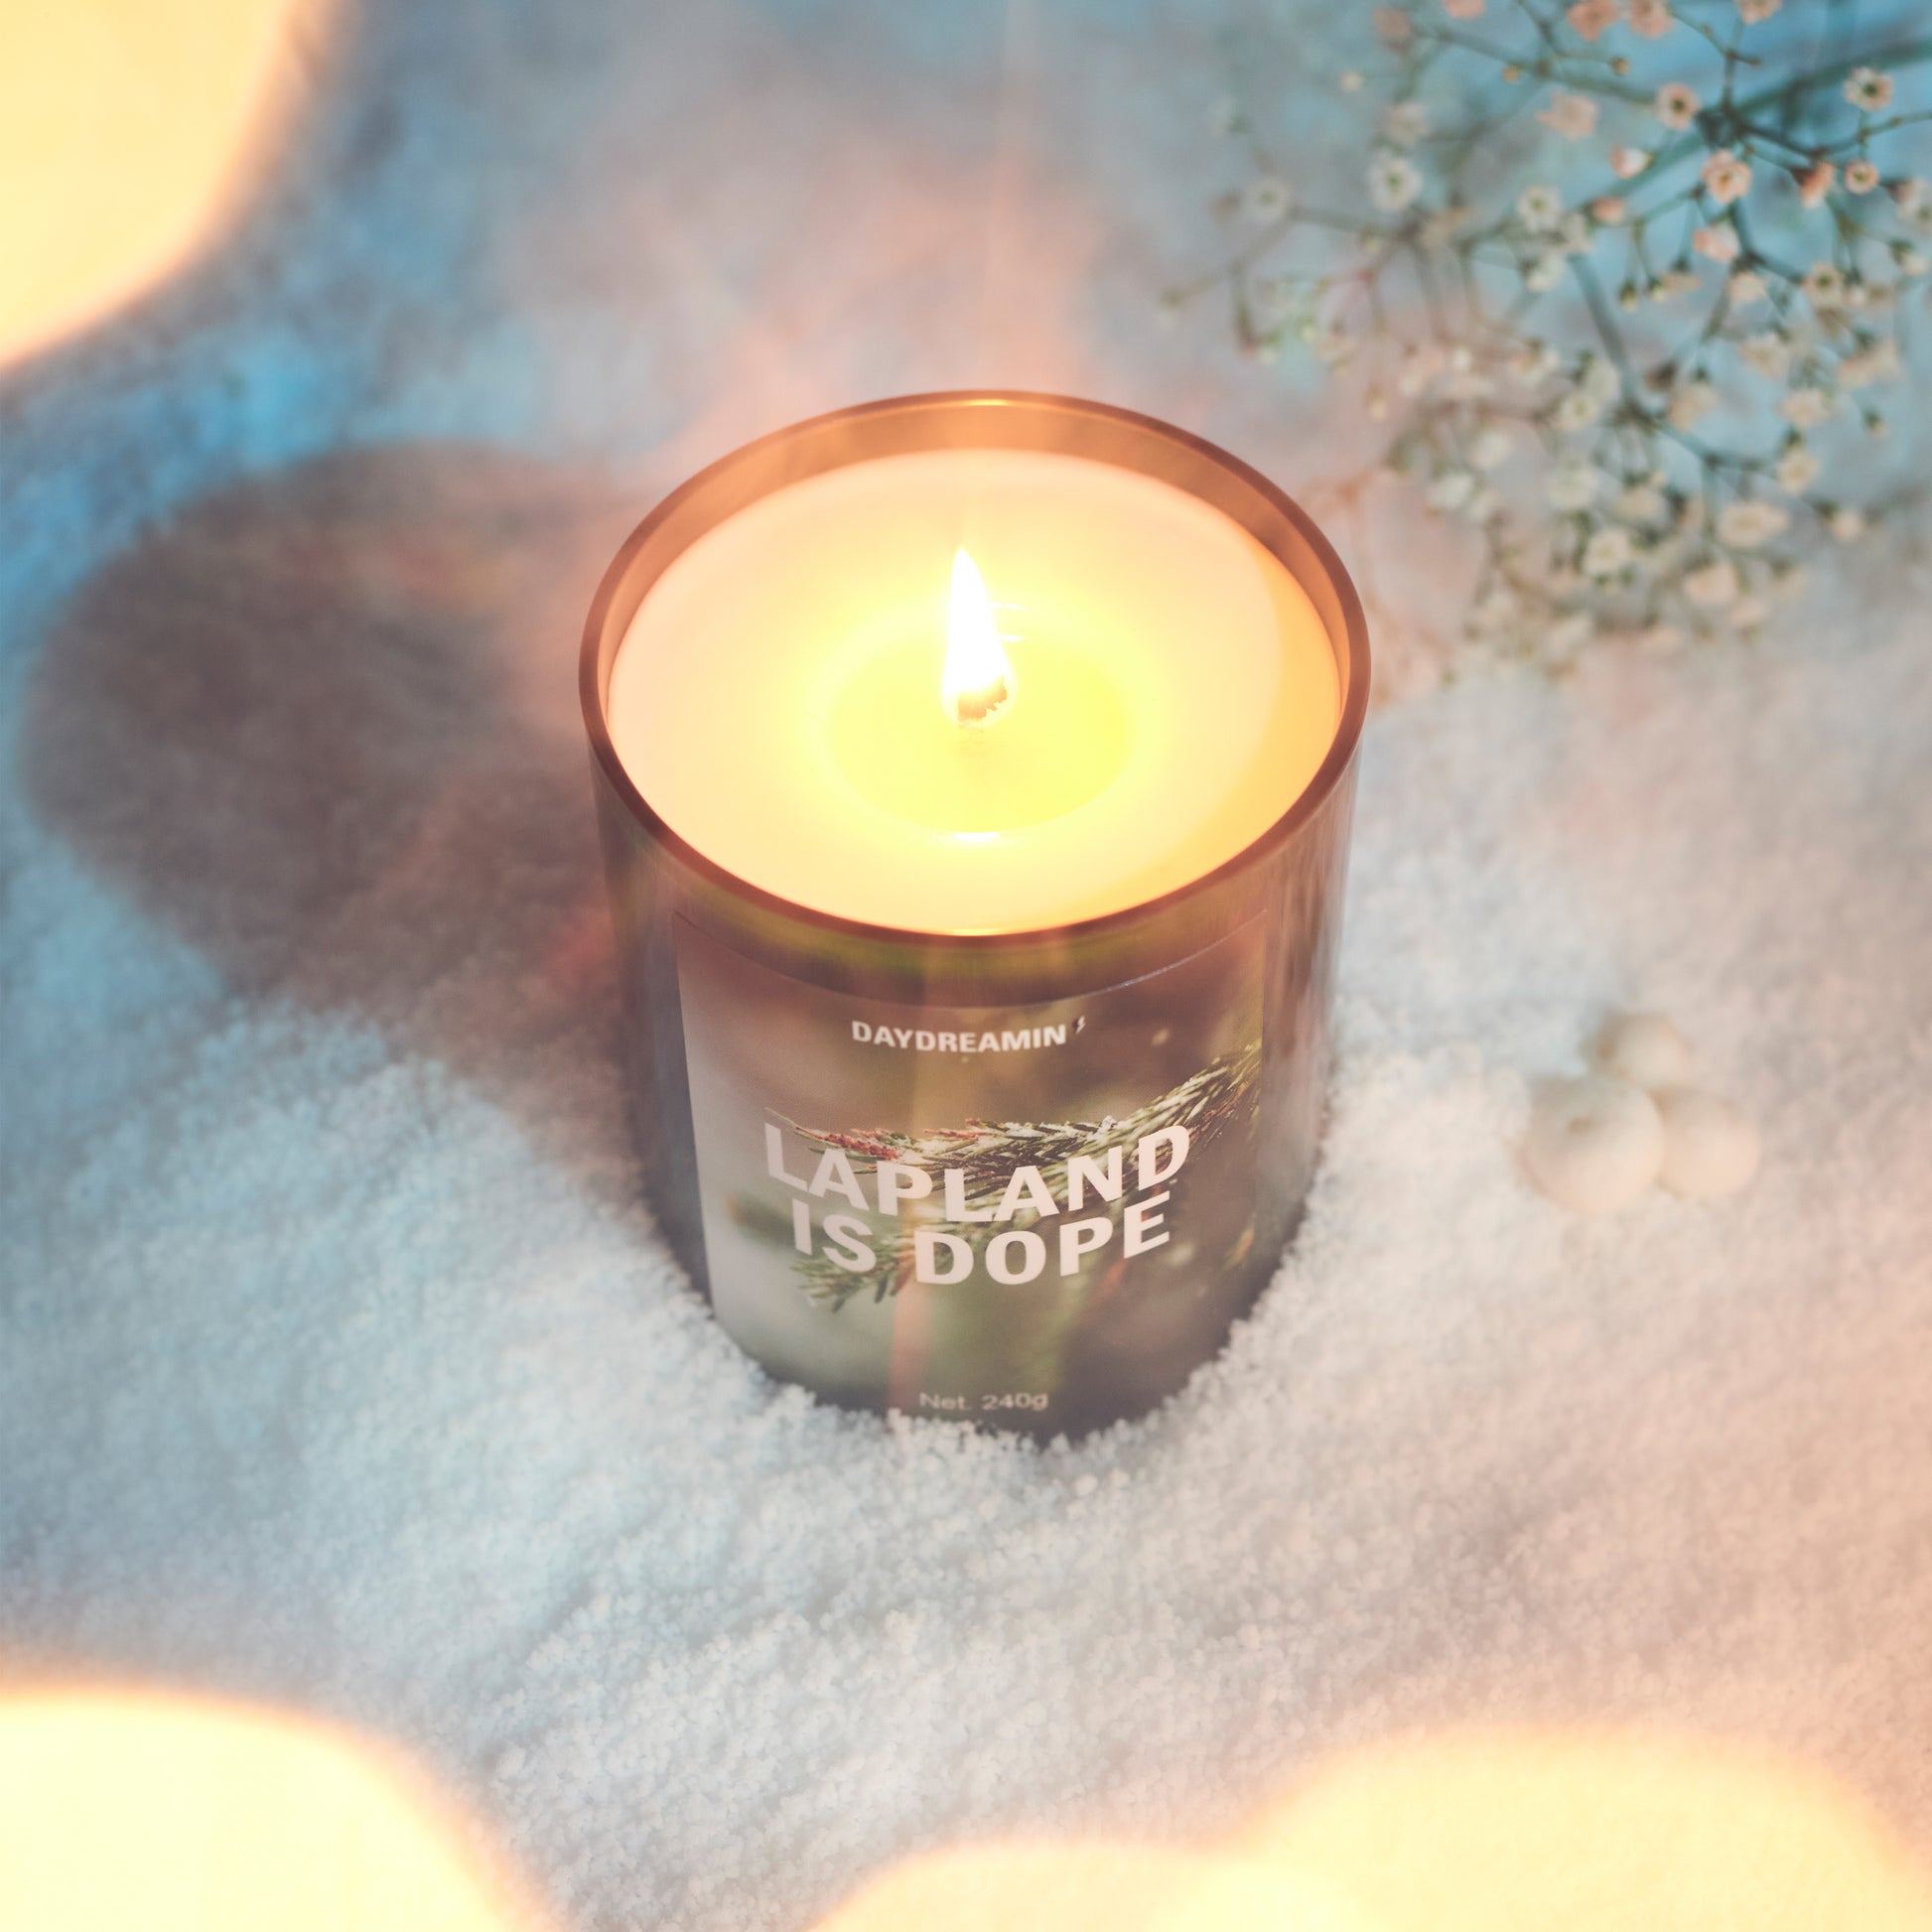 lapland is dope | scented candle